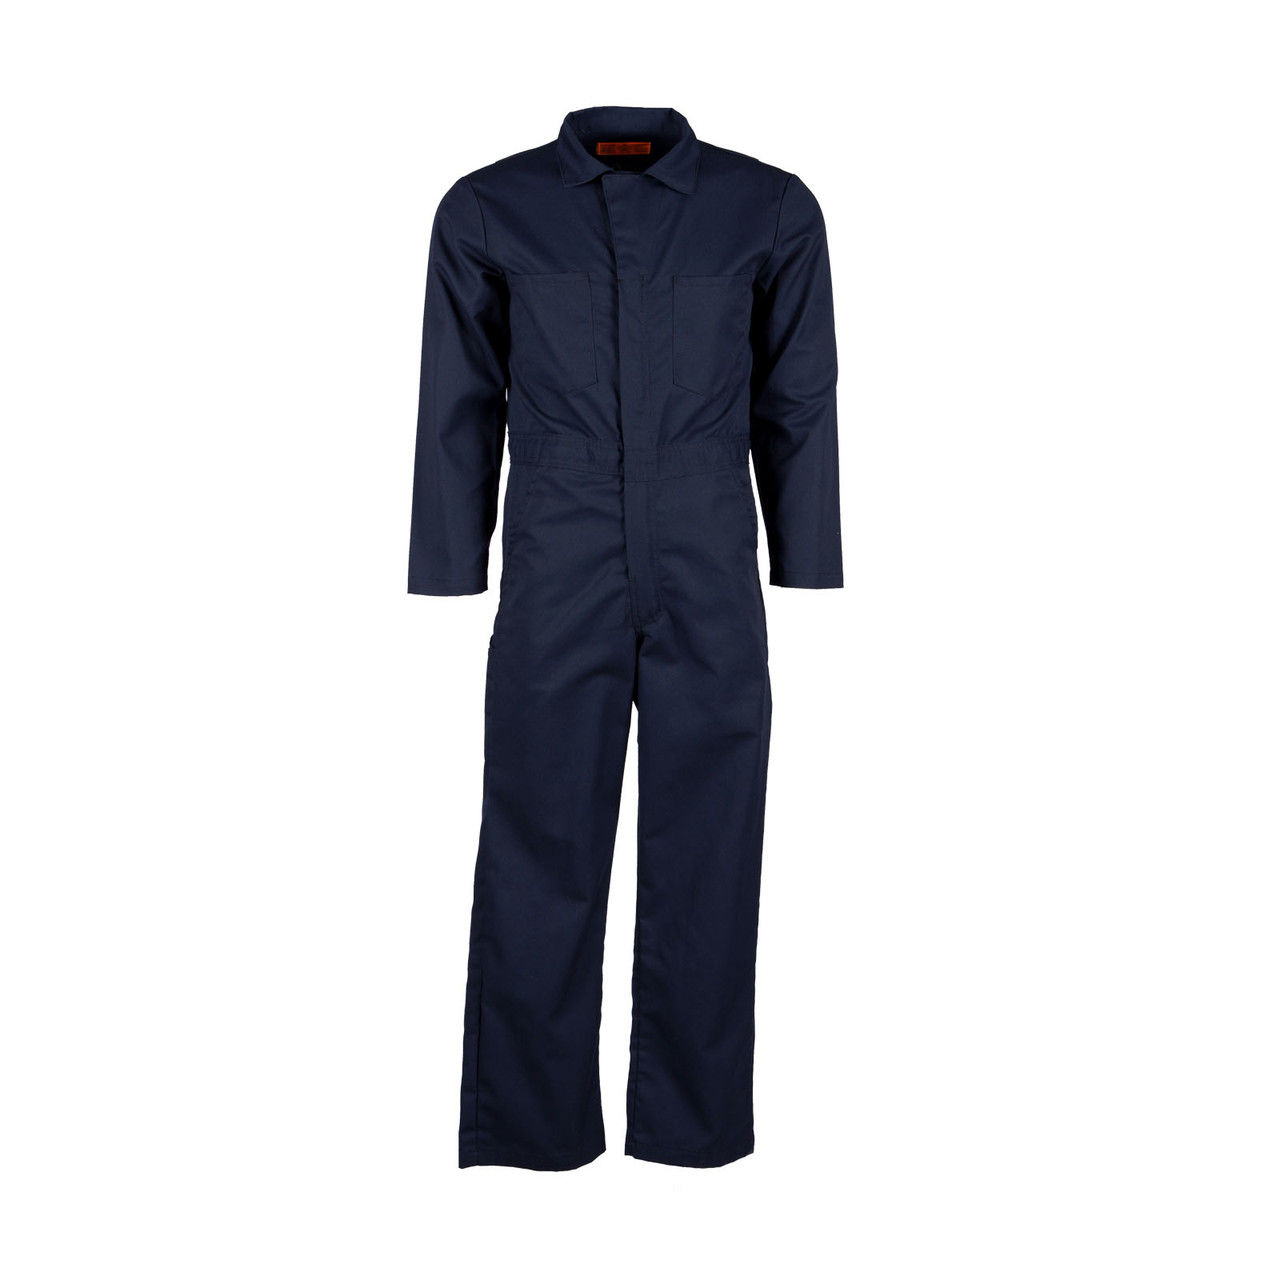 What is the waist size range for CV10NV navy coveralls by Pinnacle Textile?